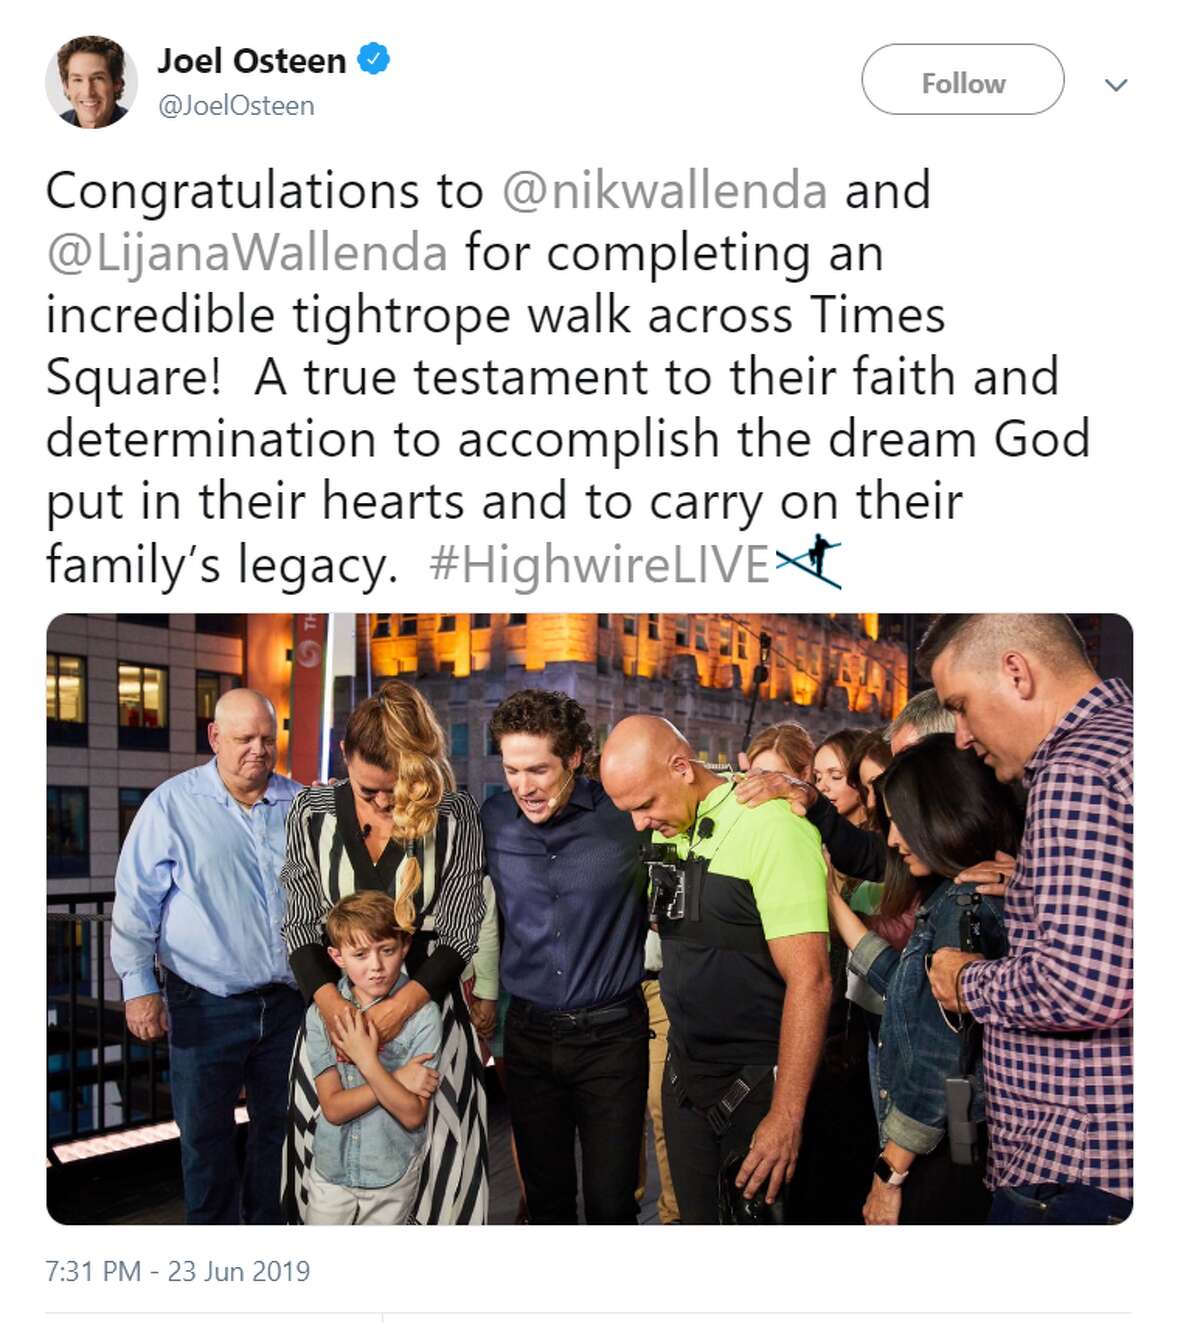 Congratulations to @nikwallenda and @LijanaWallenda for completing an incredible tightrope walk across Times Square!  A true testament to their faith and determination to accomplish the dream God put in their hearts and to carry on their family’s legacy.  #HighwireLIVE Twitter account: @JoelOsteen